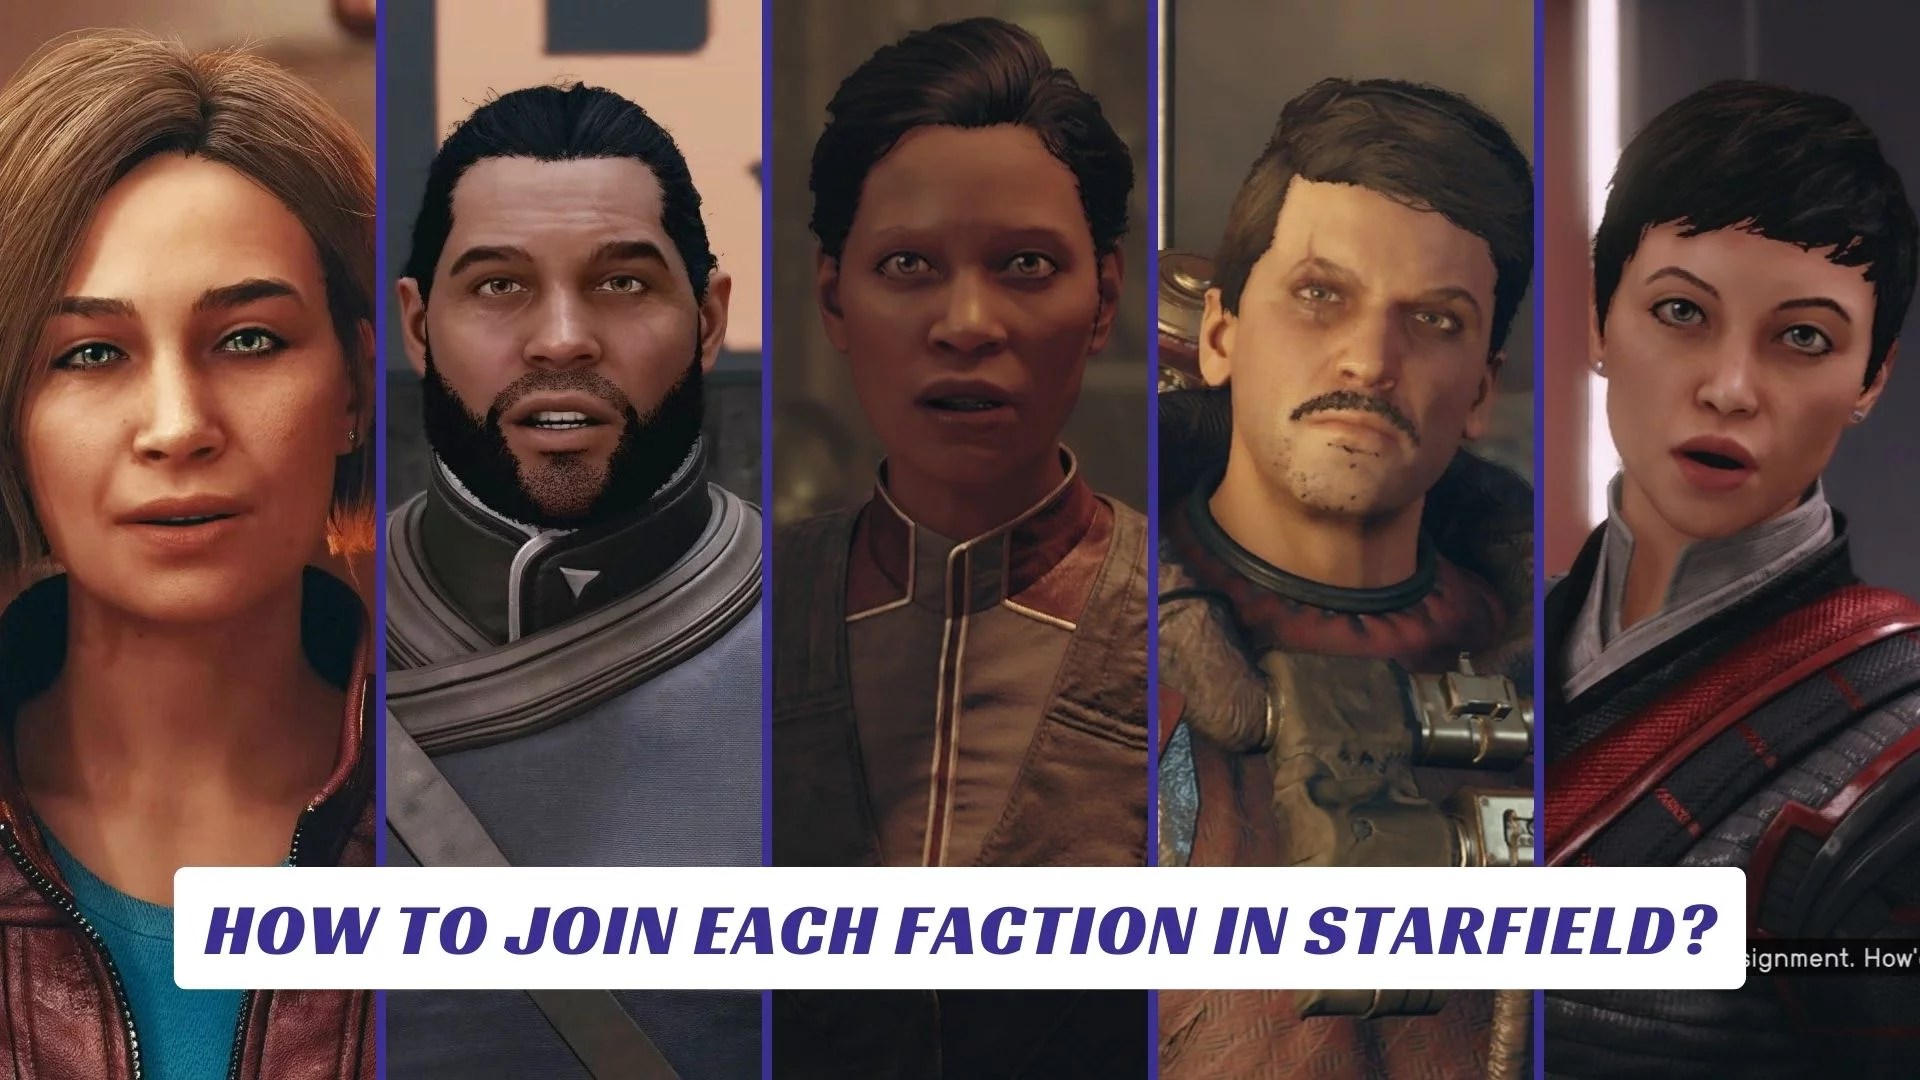 How To Join Each Faction In Starfield? - Lawod